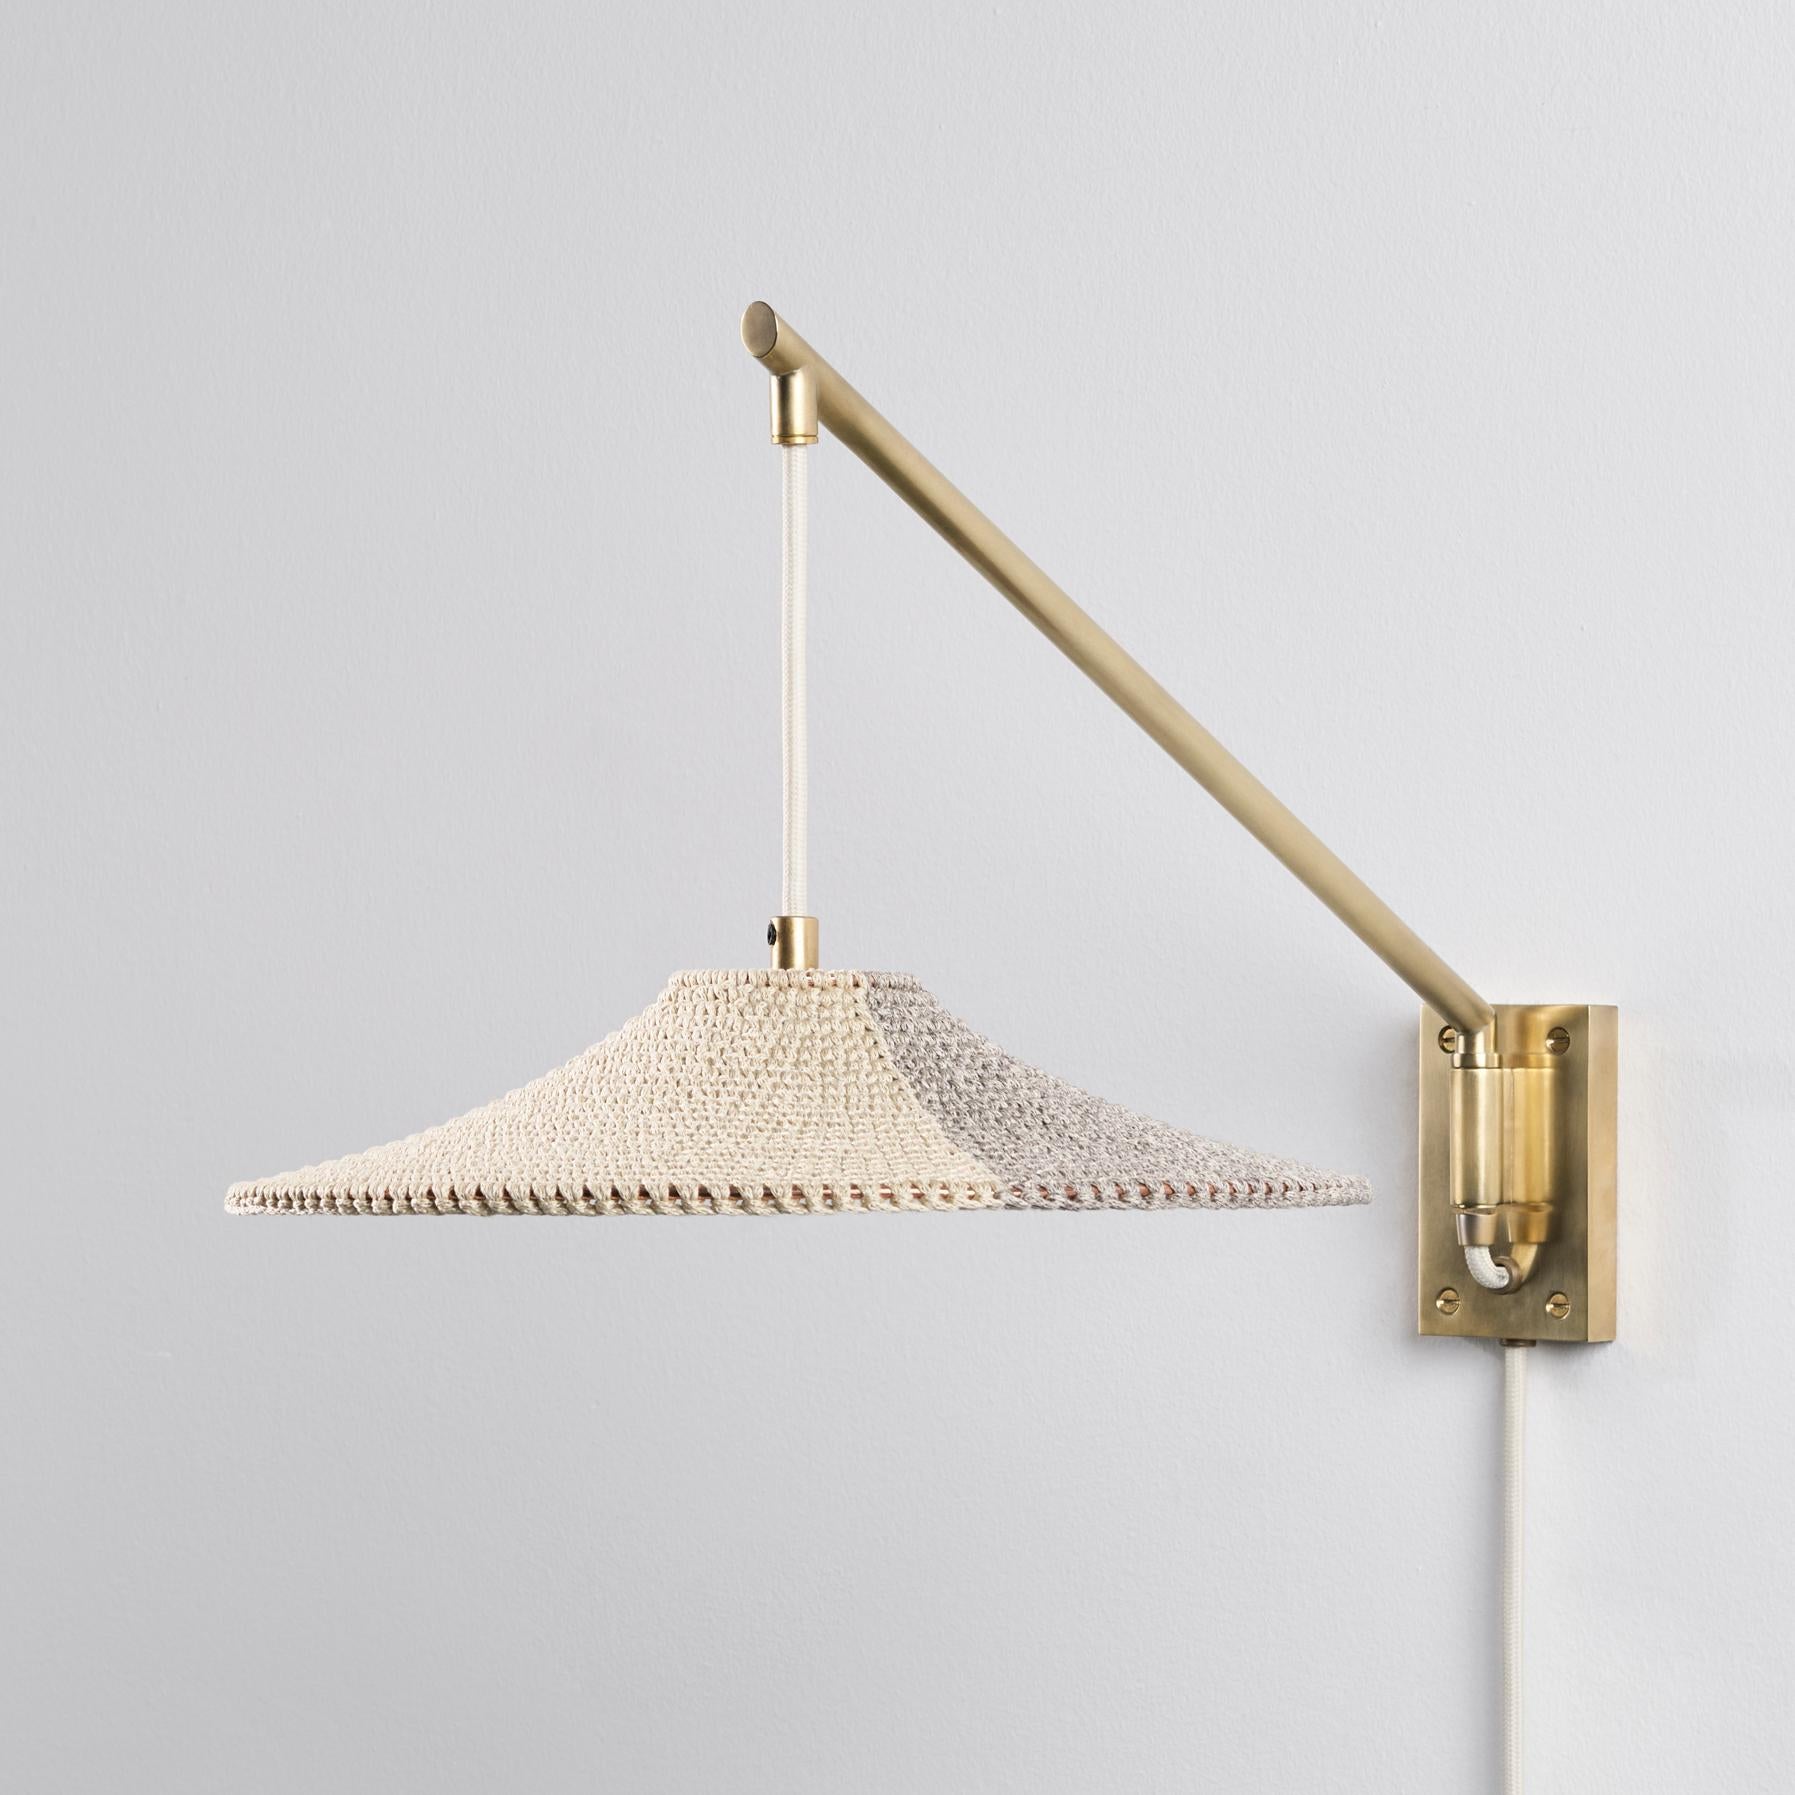 A direct light source, pivoting left and right for easy adjustment of light focus. SS01 Wall Arm Short is perfect to create a relaxed atmosphere for bedside lighting.

Our pendants and lighting designs are made using 100% Egyptian mercerised cotton